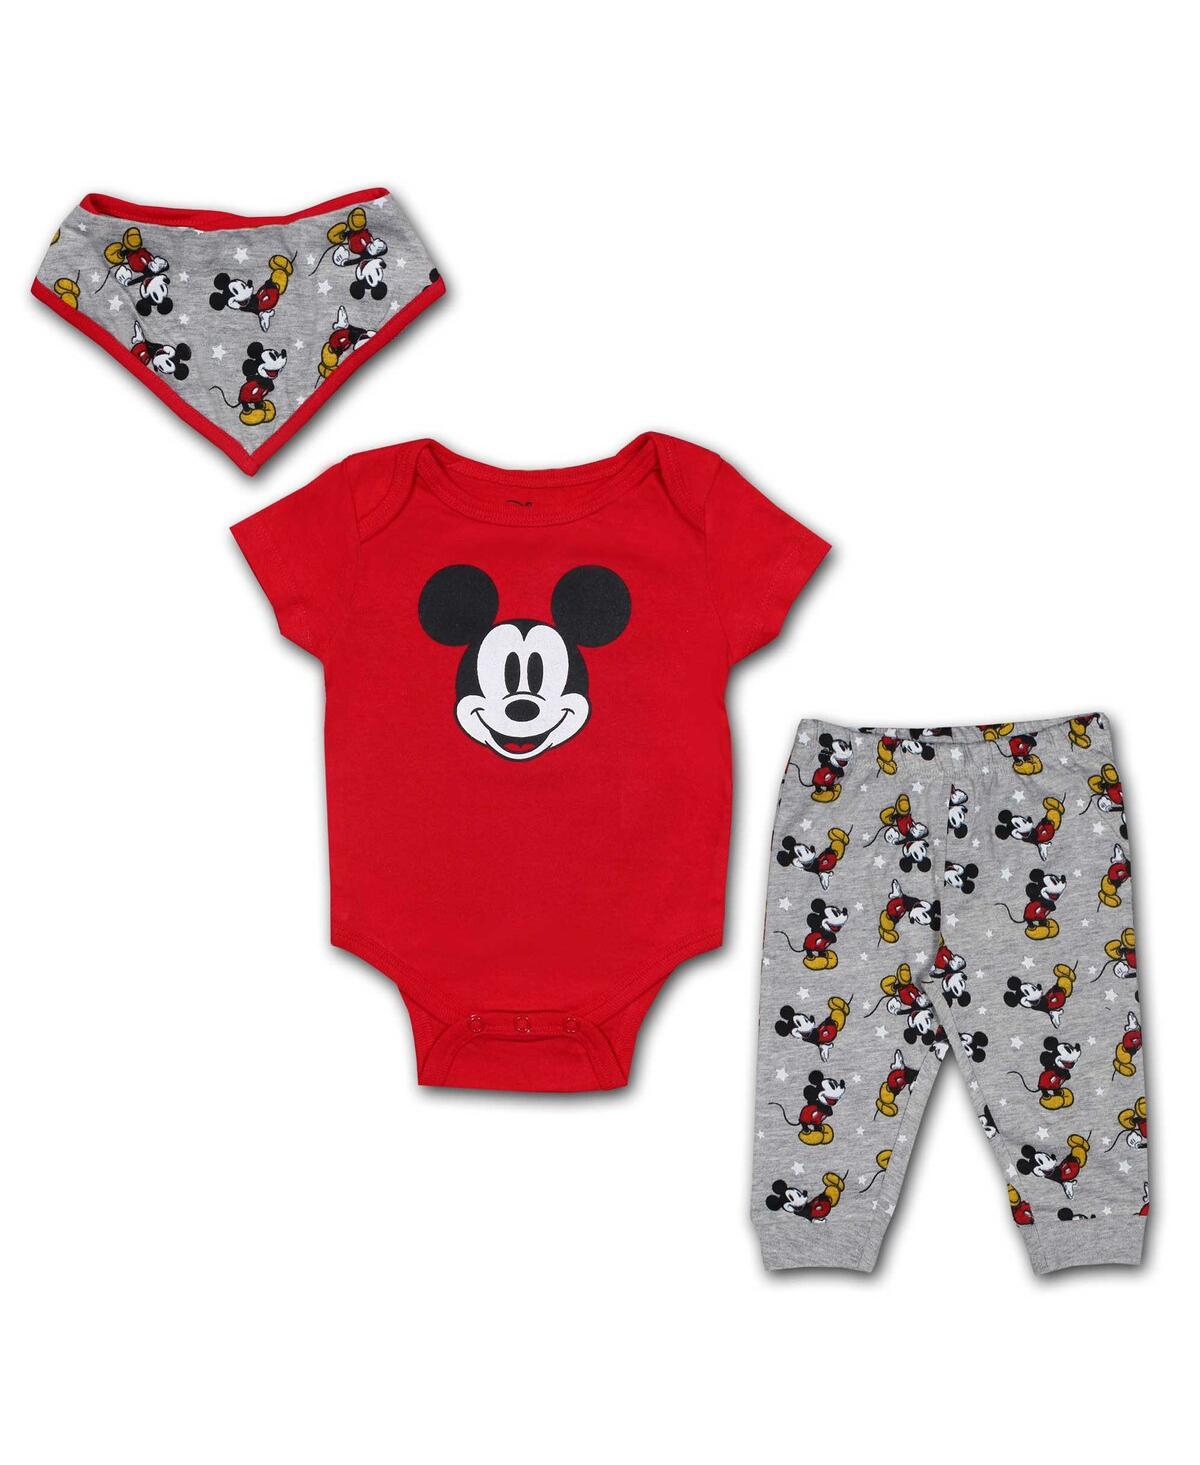 Shop Children's Apparel Network Baby Boys And Girls Red Mickey & Friends Bodysuit, Bib And Jogger Set